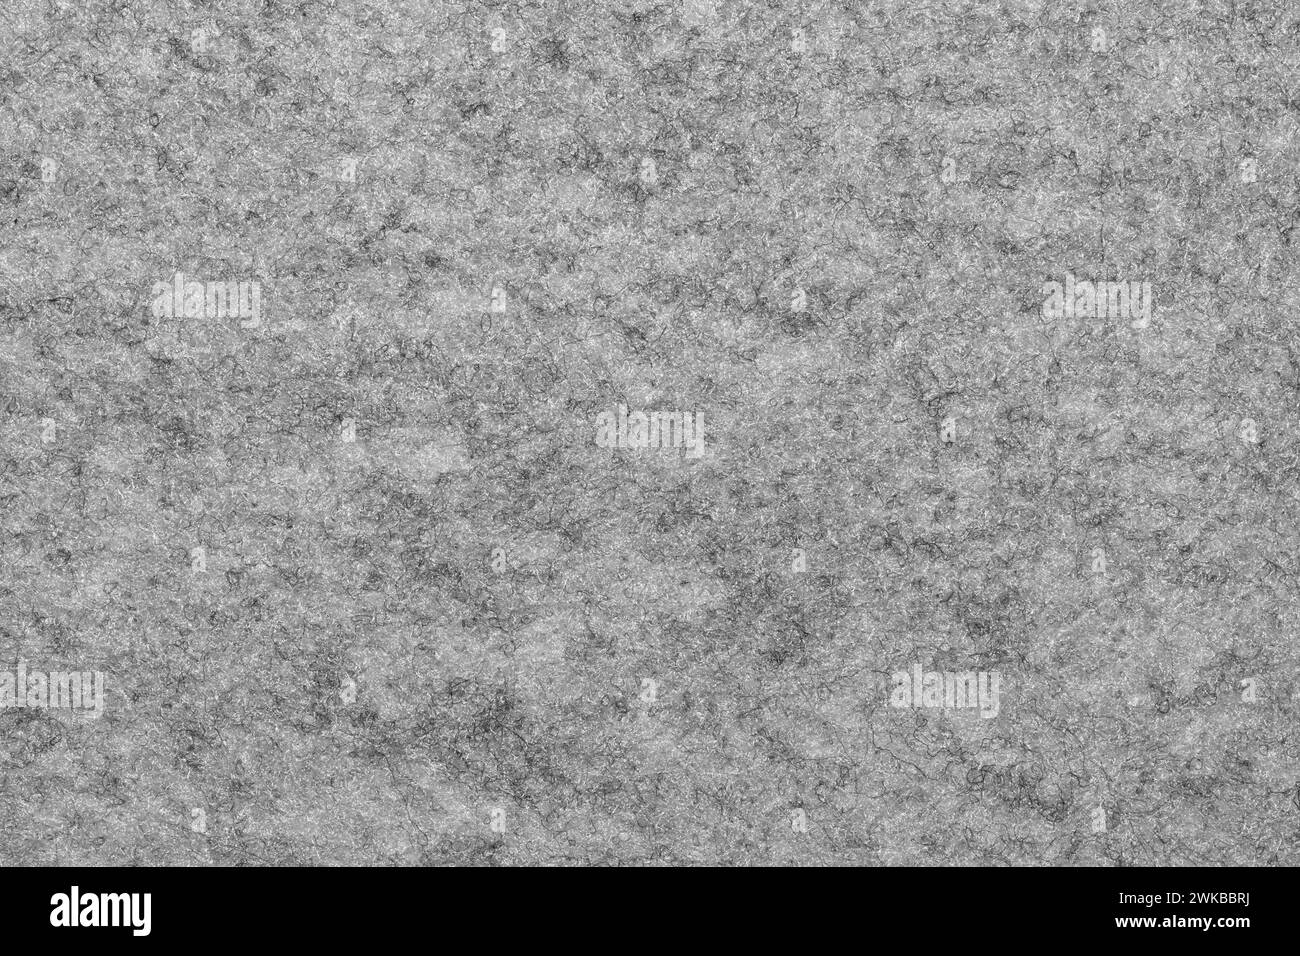 Gray felt material color swatch sample background. Building interior wall decor with copy space. Stock Photo